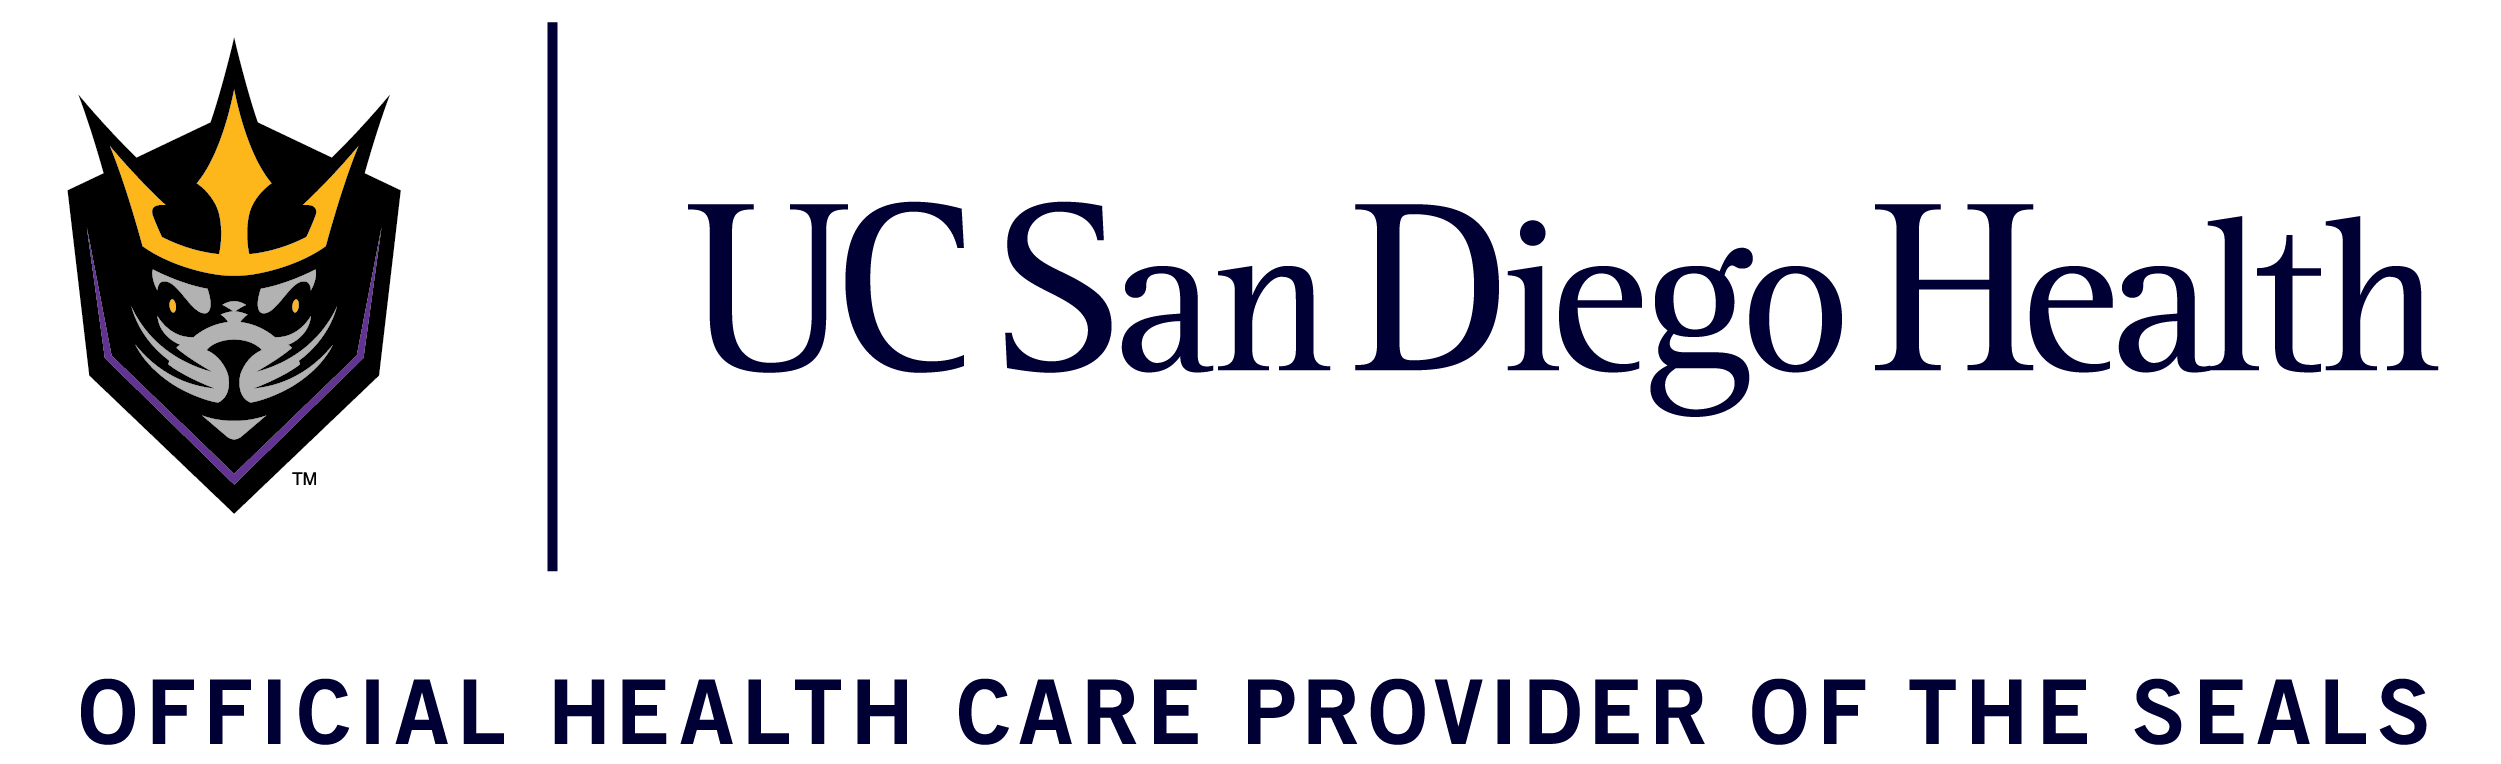 UC San Diego Health Official Health Care Provider of the Seals logo 